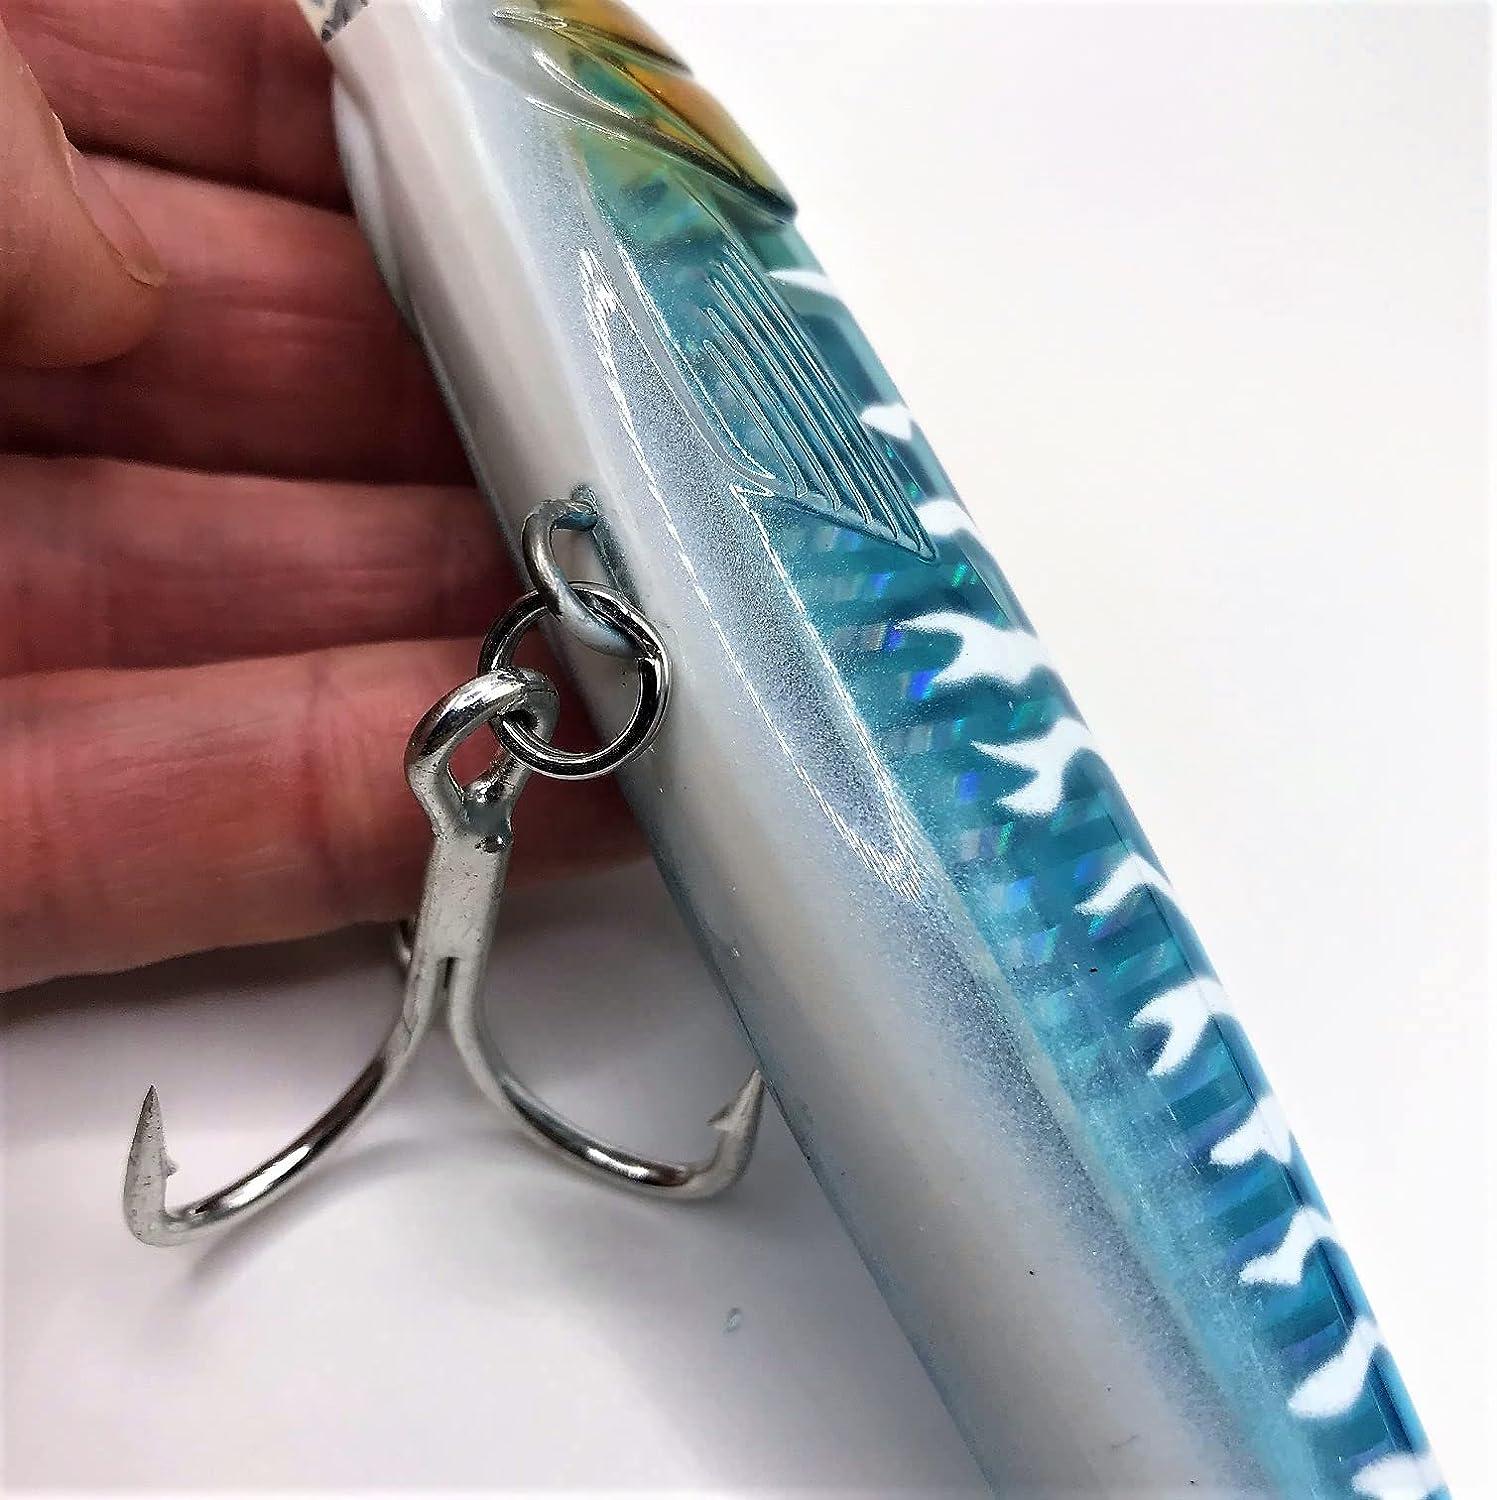 THE BEST DEEP DIVE TROLLING LURE 